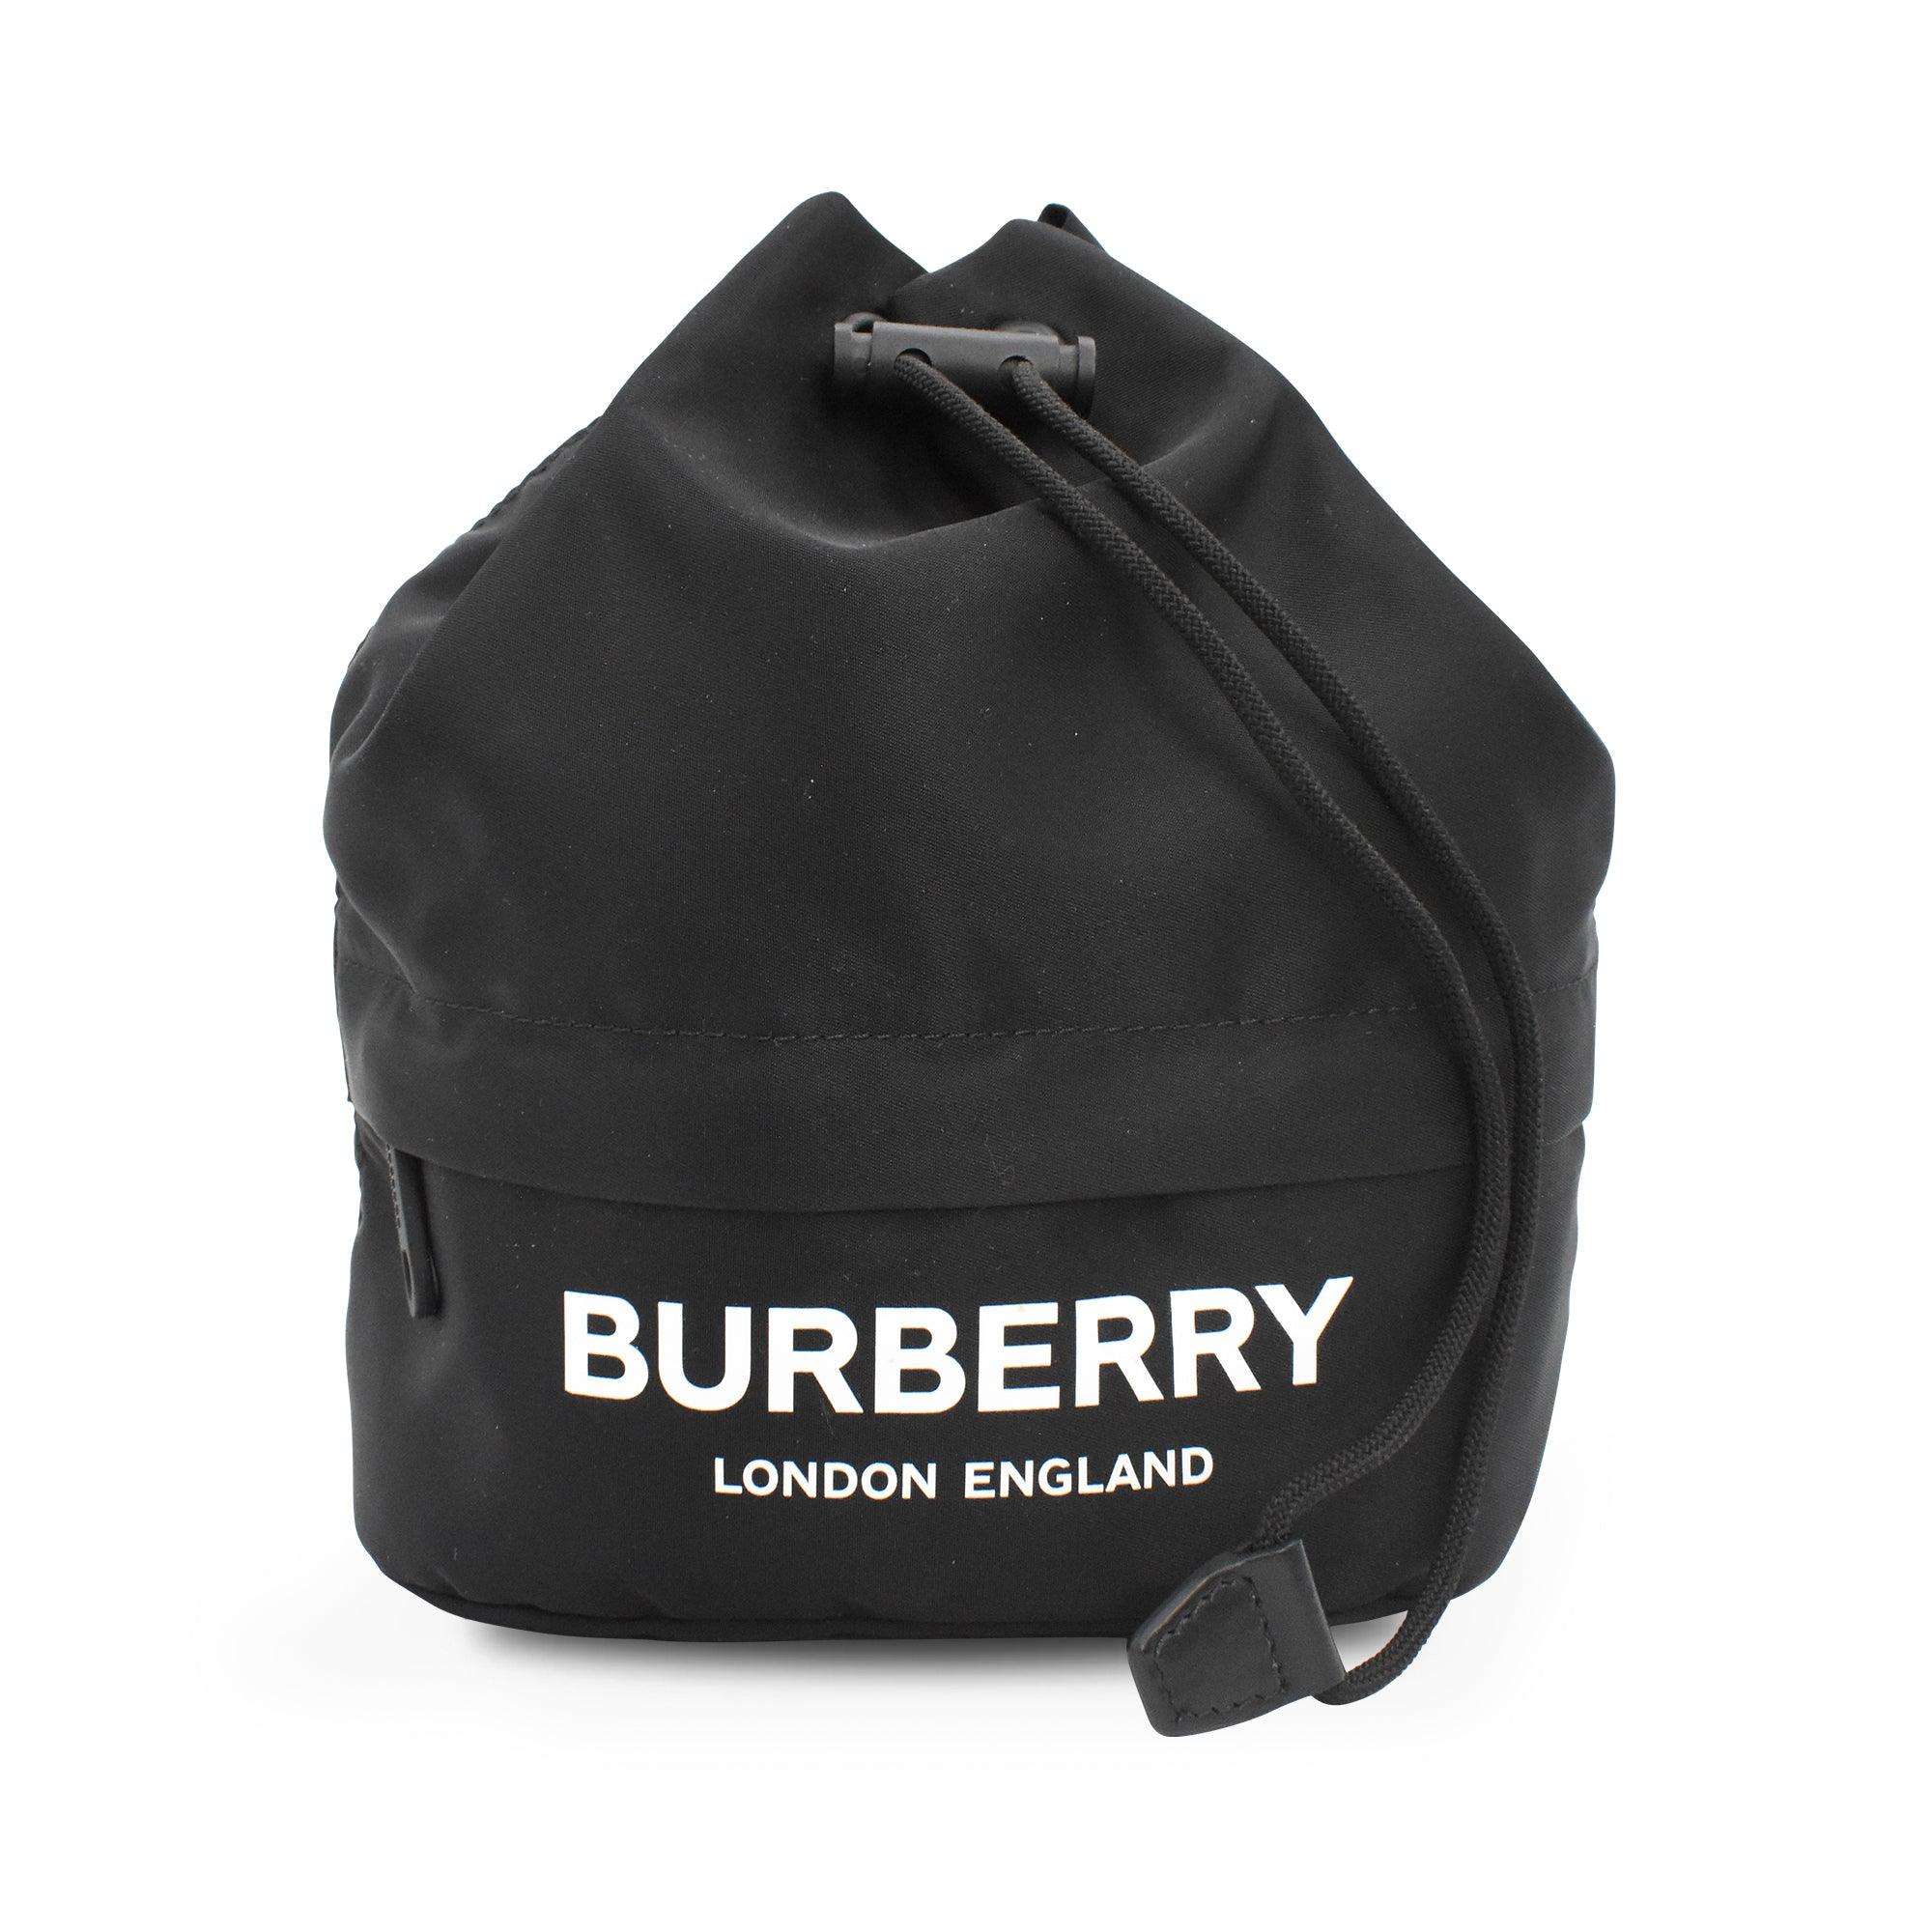 Burberry Bucket Bag - Fashionably Yours